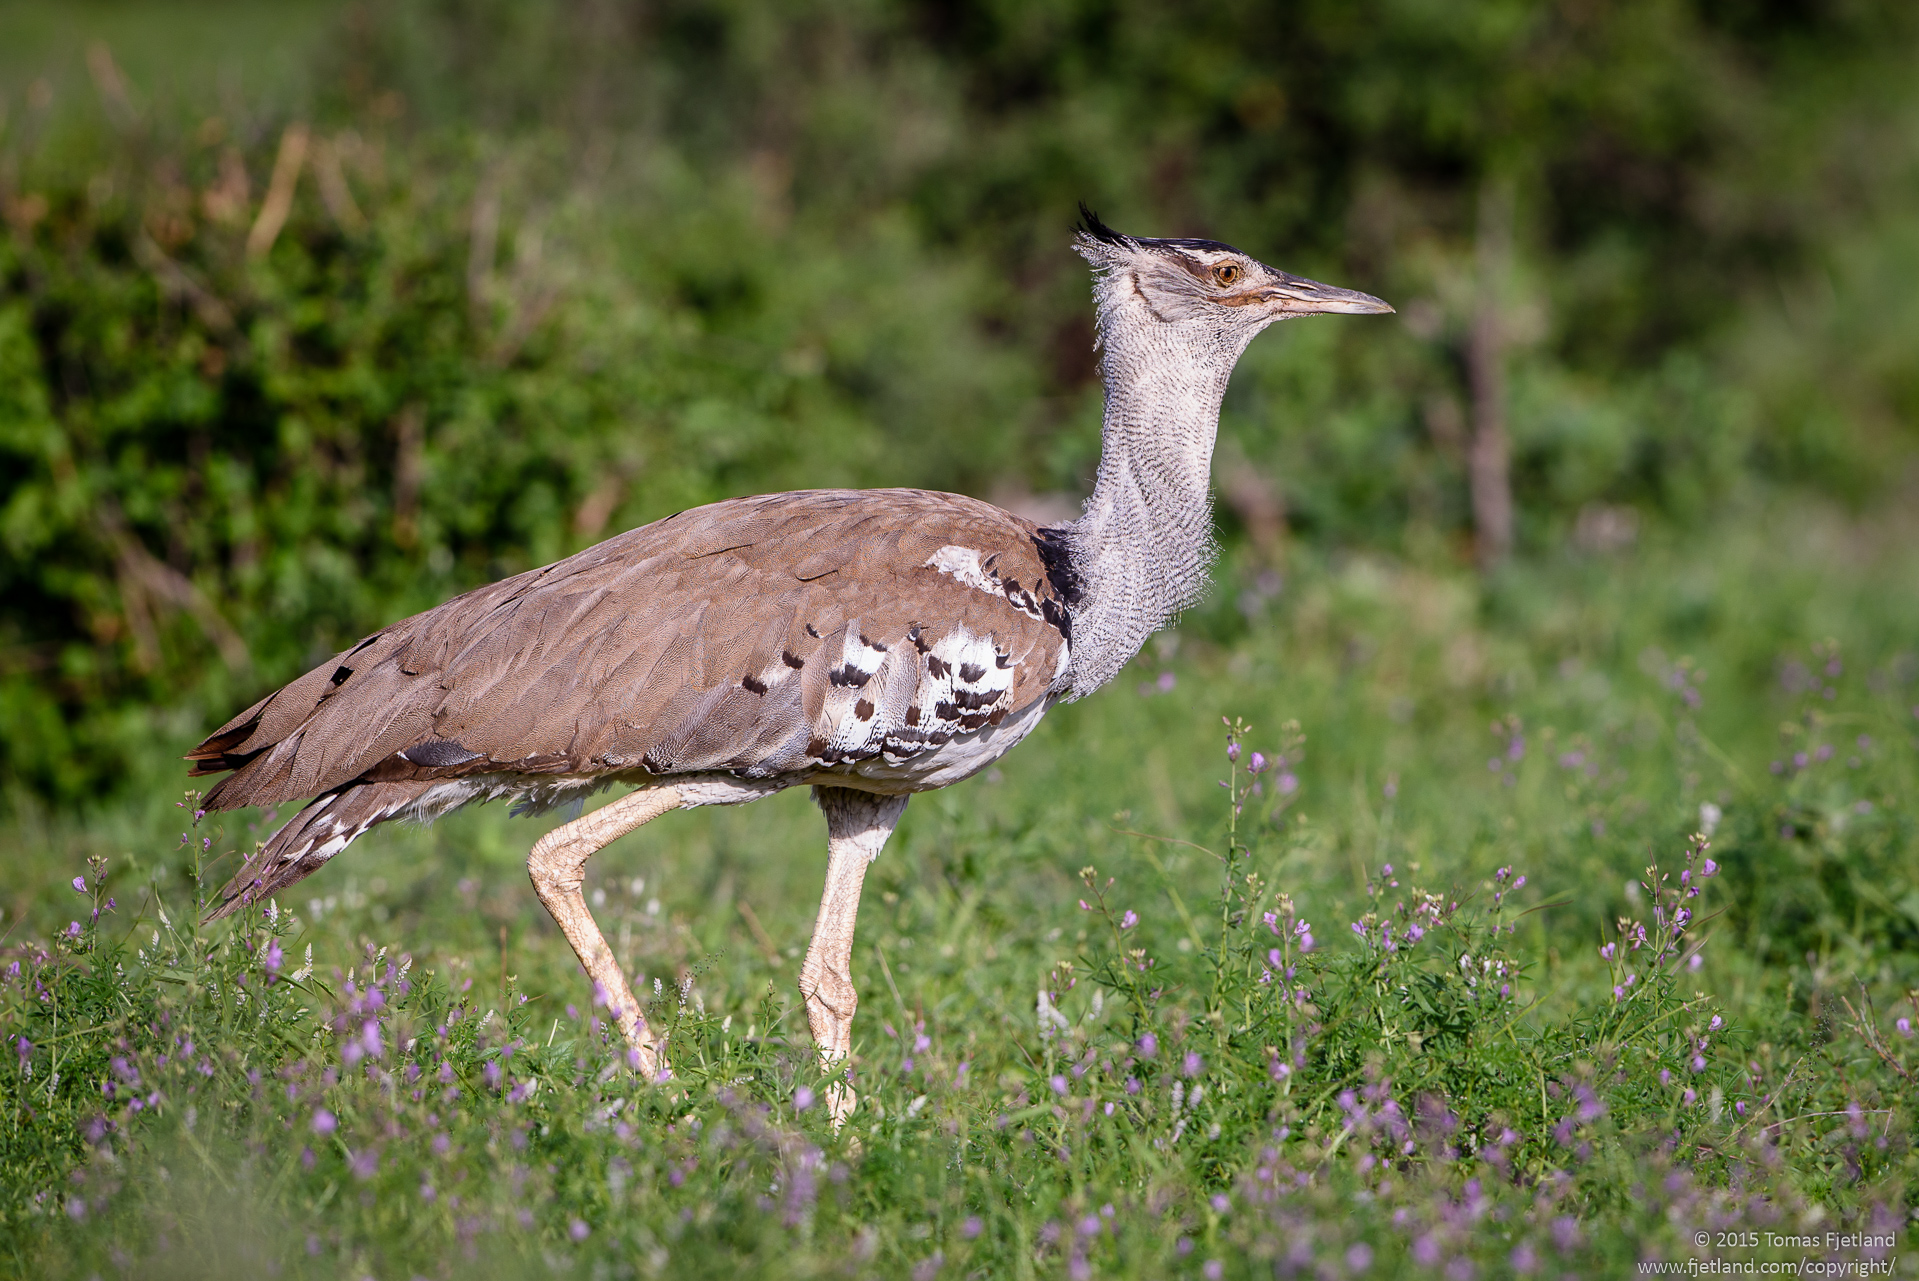 The Kori bustard is the largest flying bird native to Africa, and it might be the heaviest bird capable of flight. Like here, it spends most of its time looking for food on the ground, mostly insects.